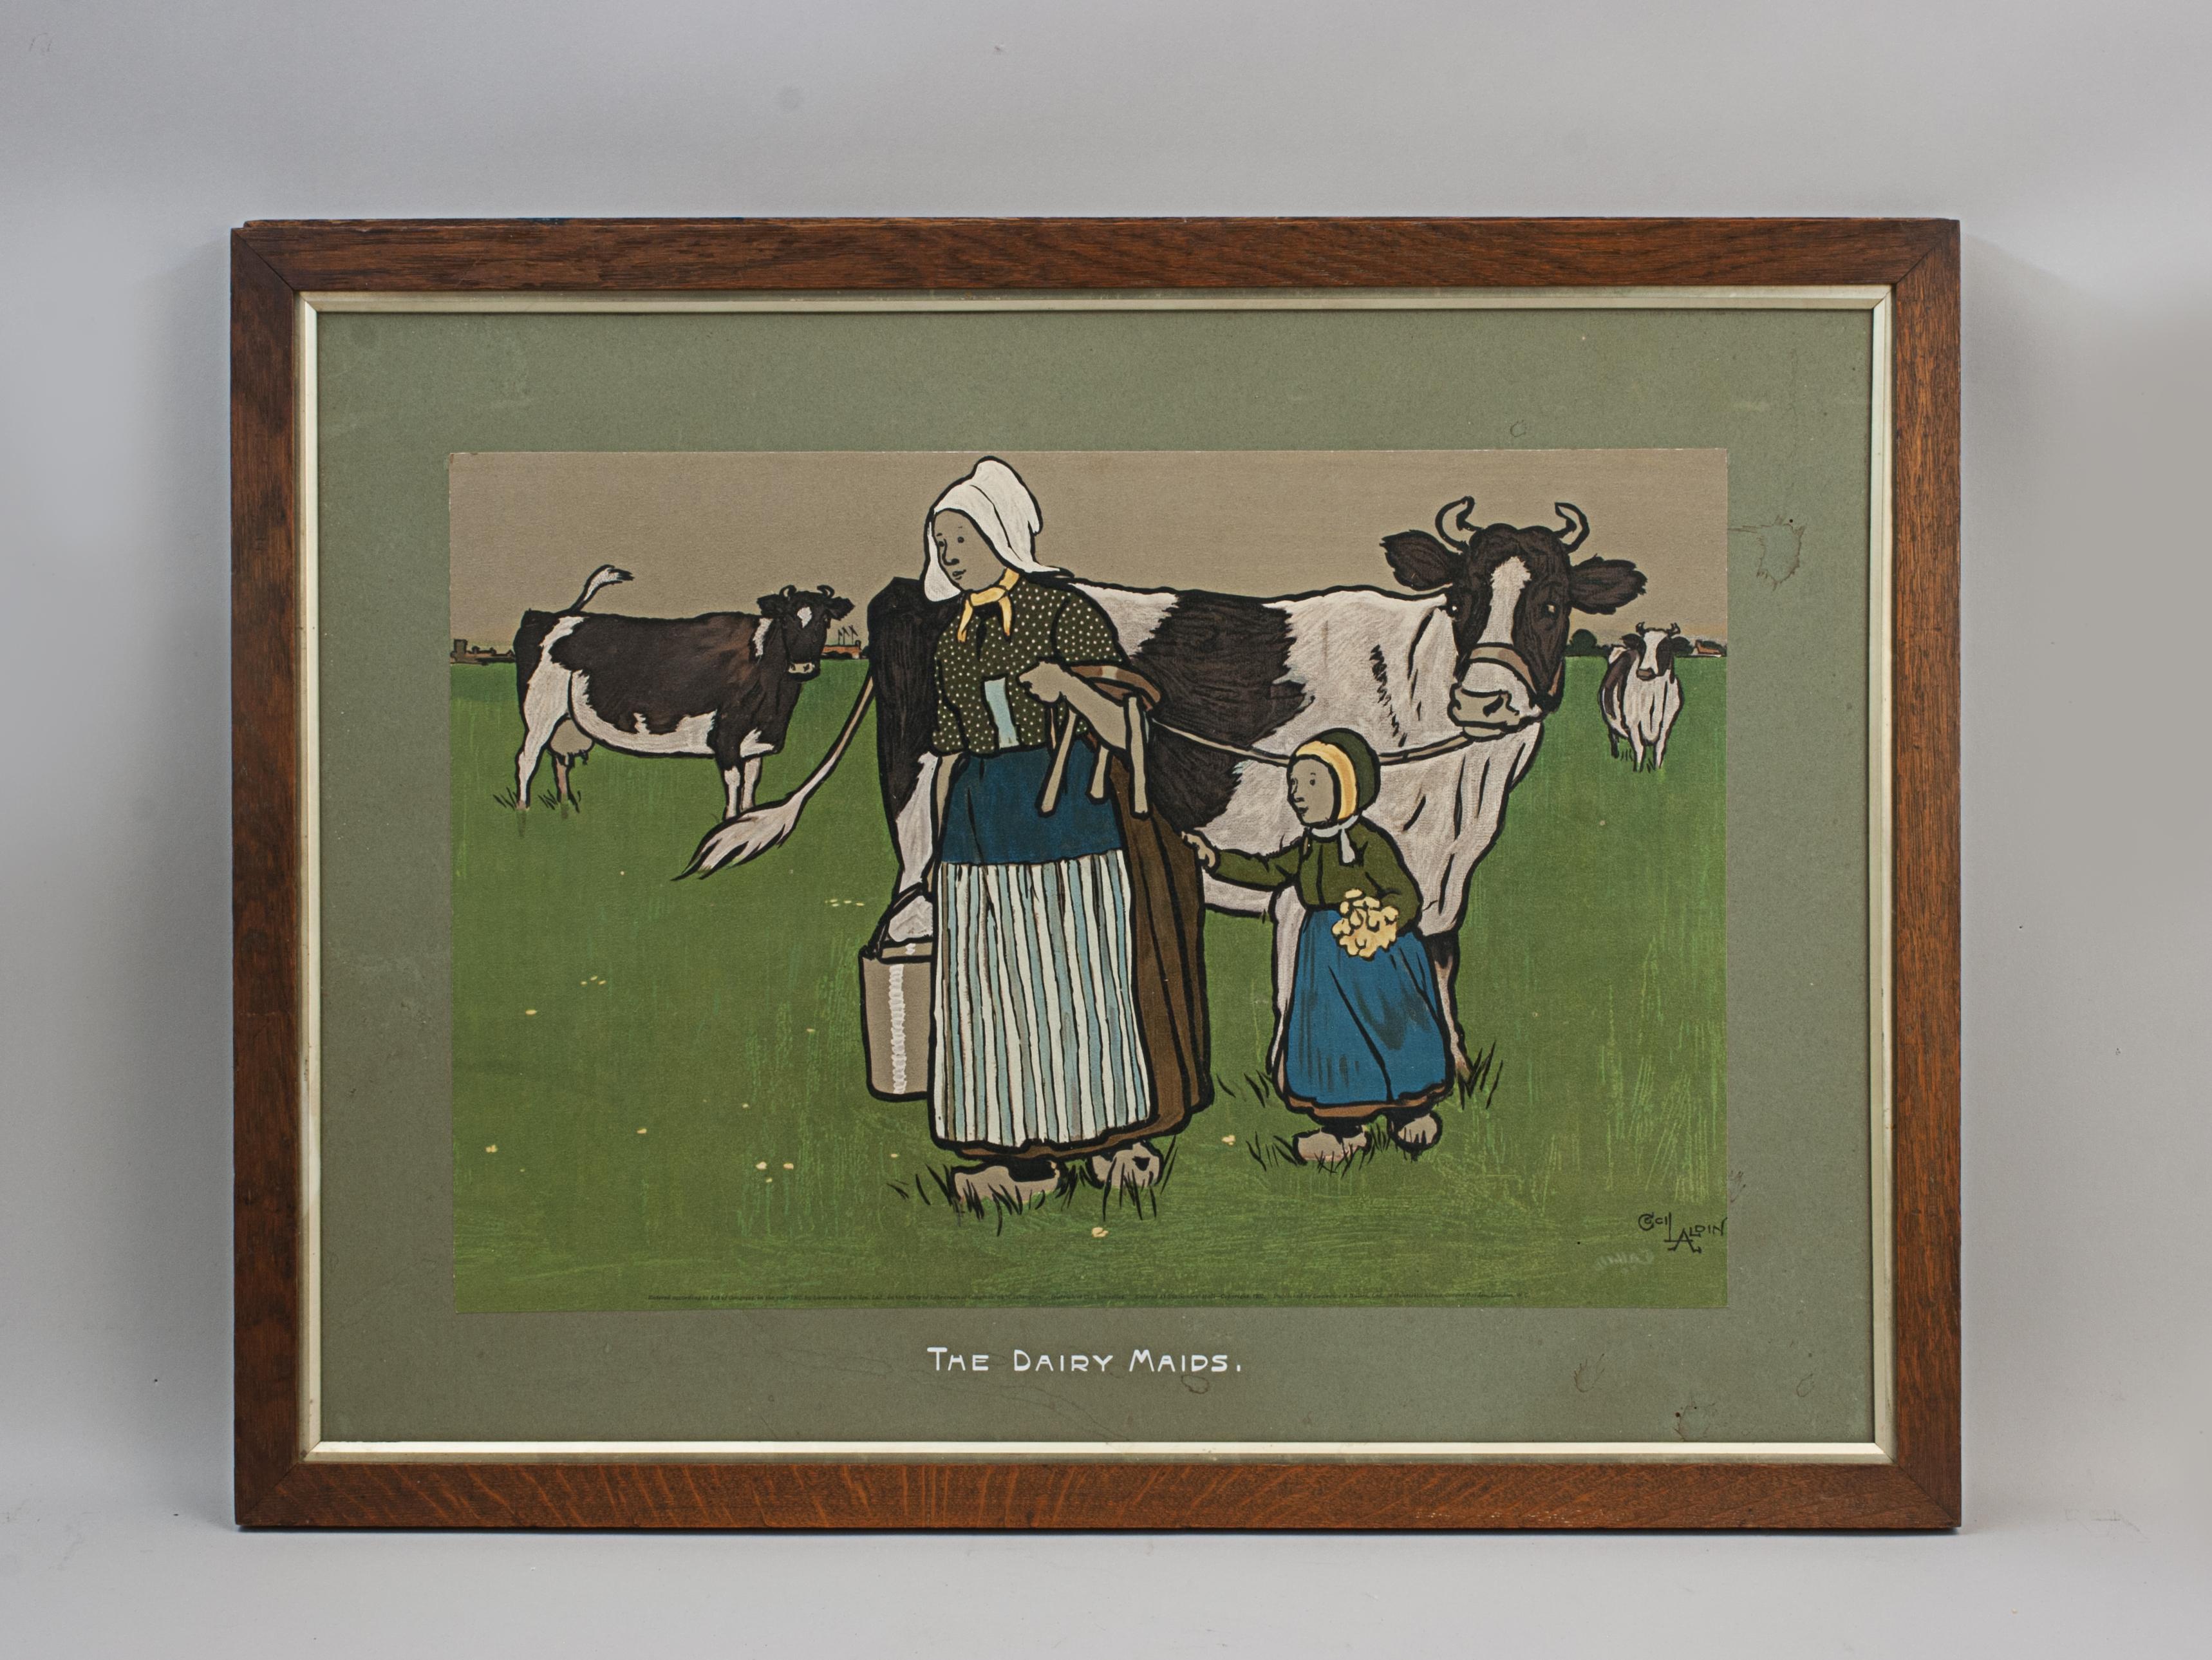 Cecil Aldin, Dairy Maids.
A good single chromolithograph depicting a lady carrying a milk pail, milking stool, leading a cow from the field, a young girl is following holding the ladies skirt. Framed in an old oak frame and published by Lawrence &